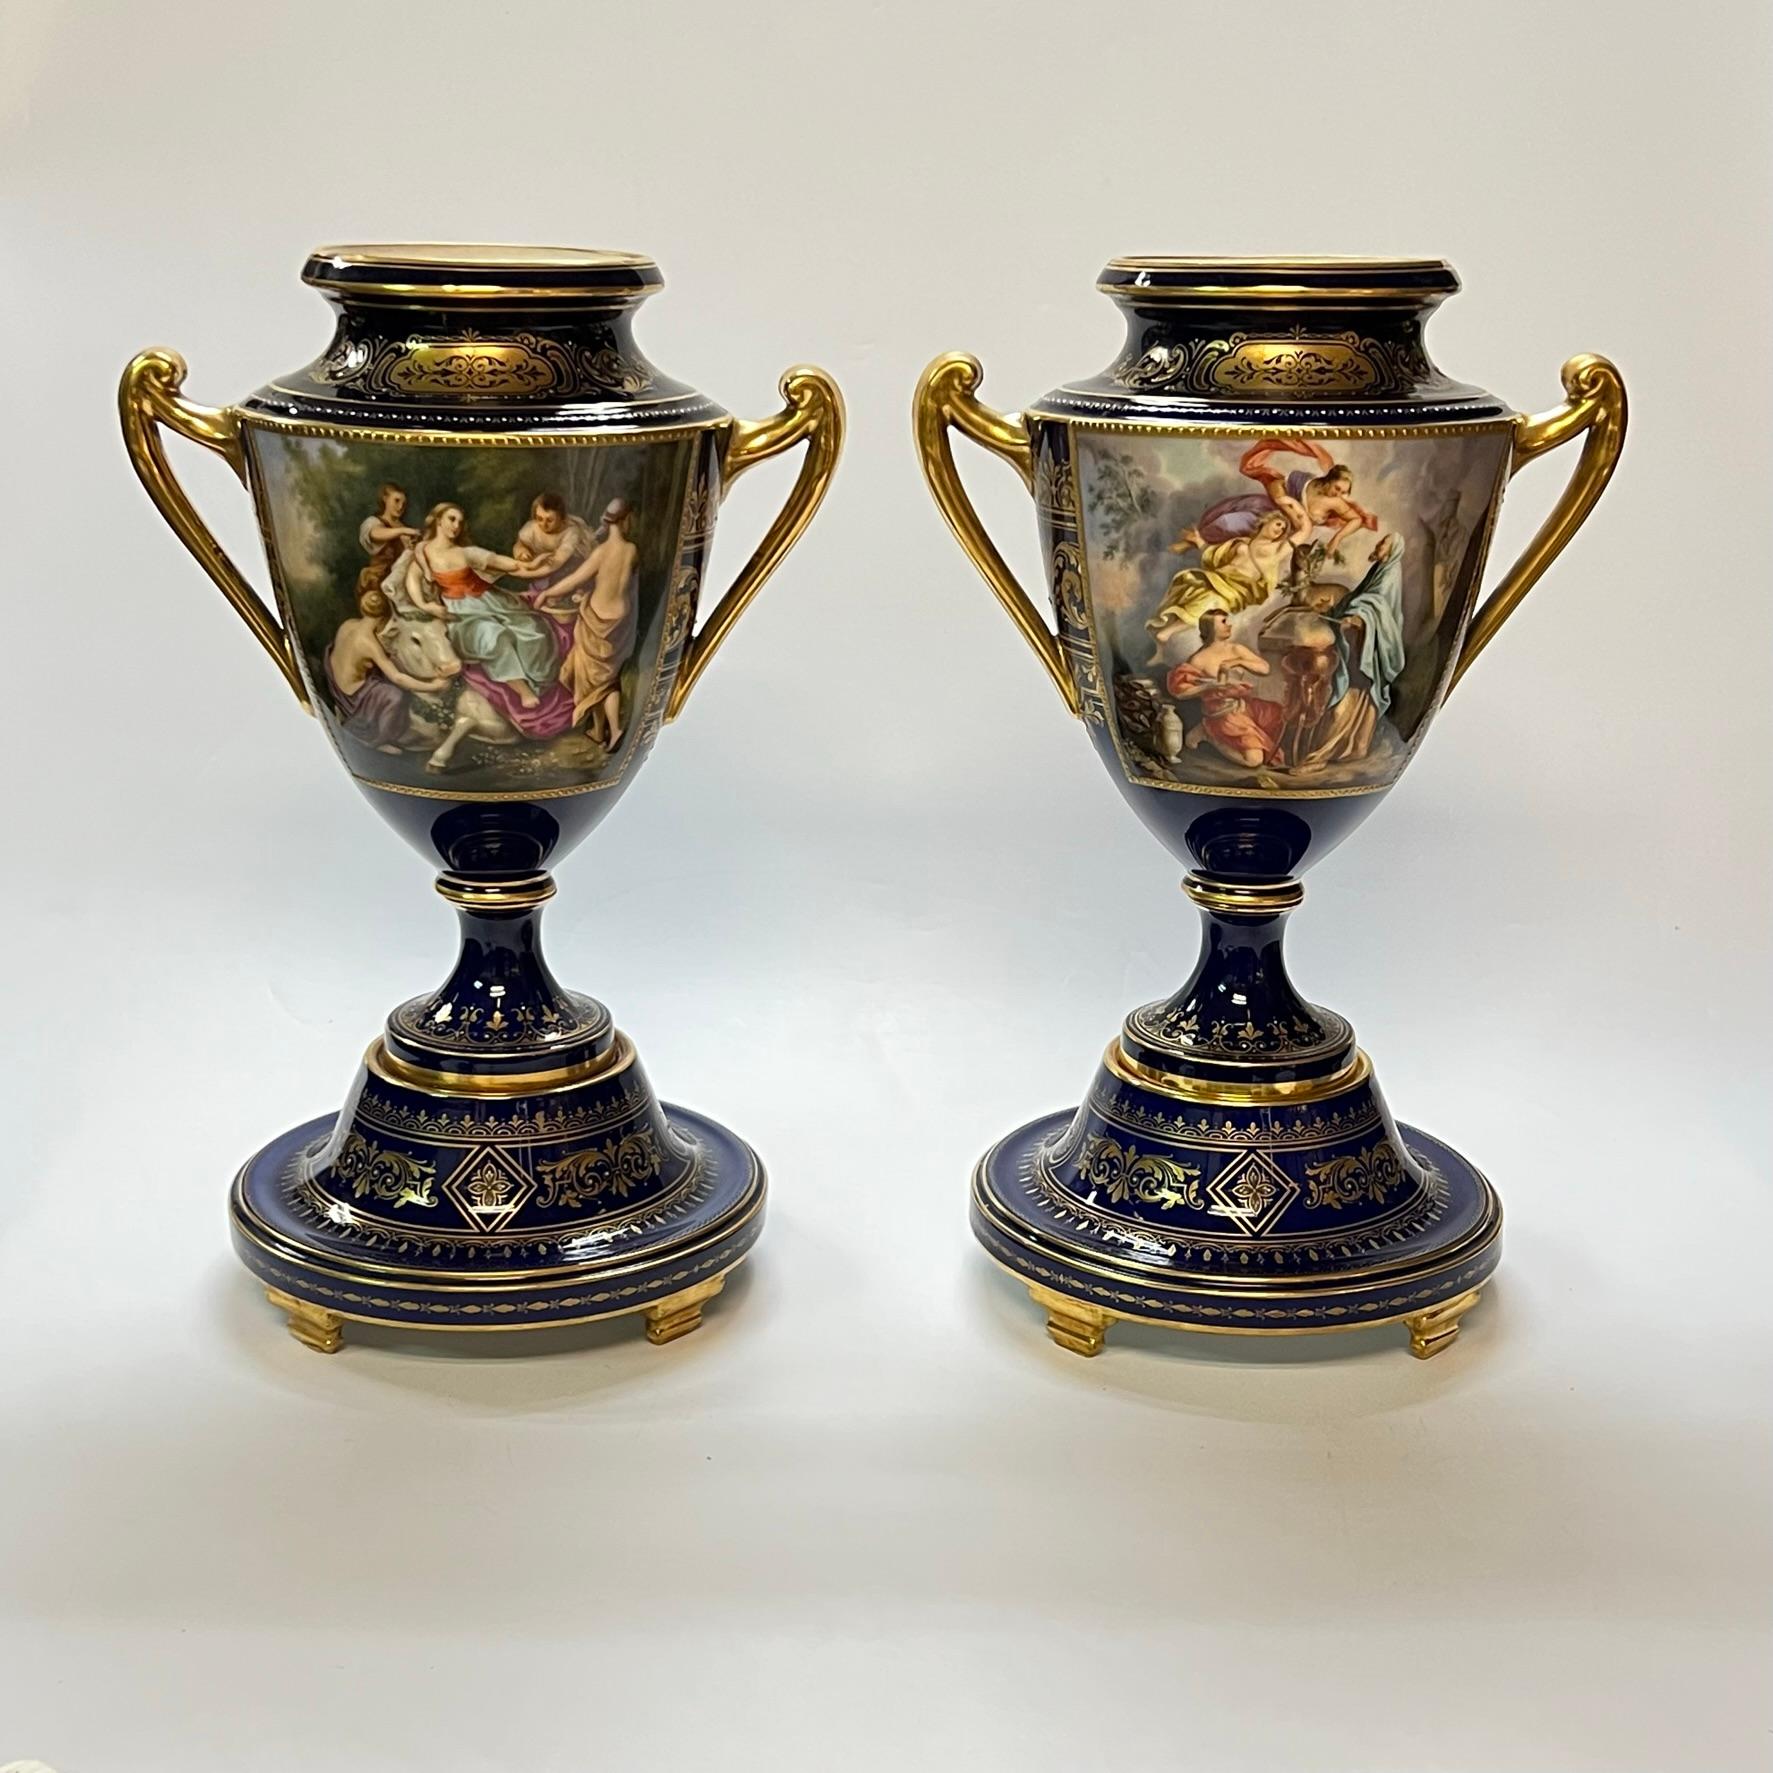 Pair of exceptional, tall handled porcelain vases from Royal Vienna with extensive raised gilding and hand-painted cartouches.  One titled on underside, Opferung der Iphigénie (Sacrifice of Iphigenia).